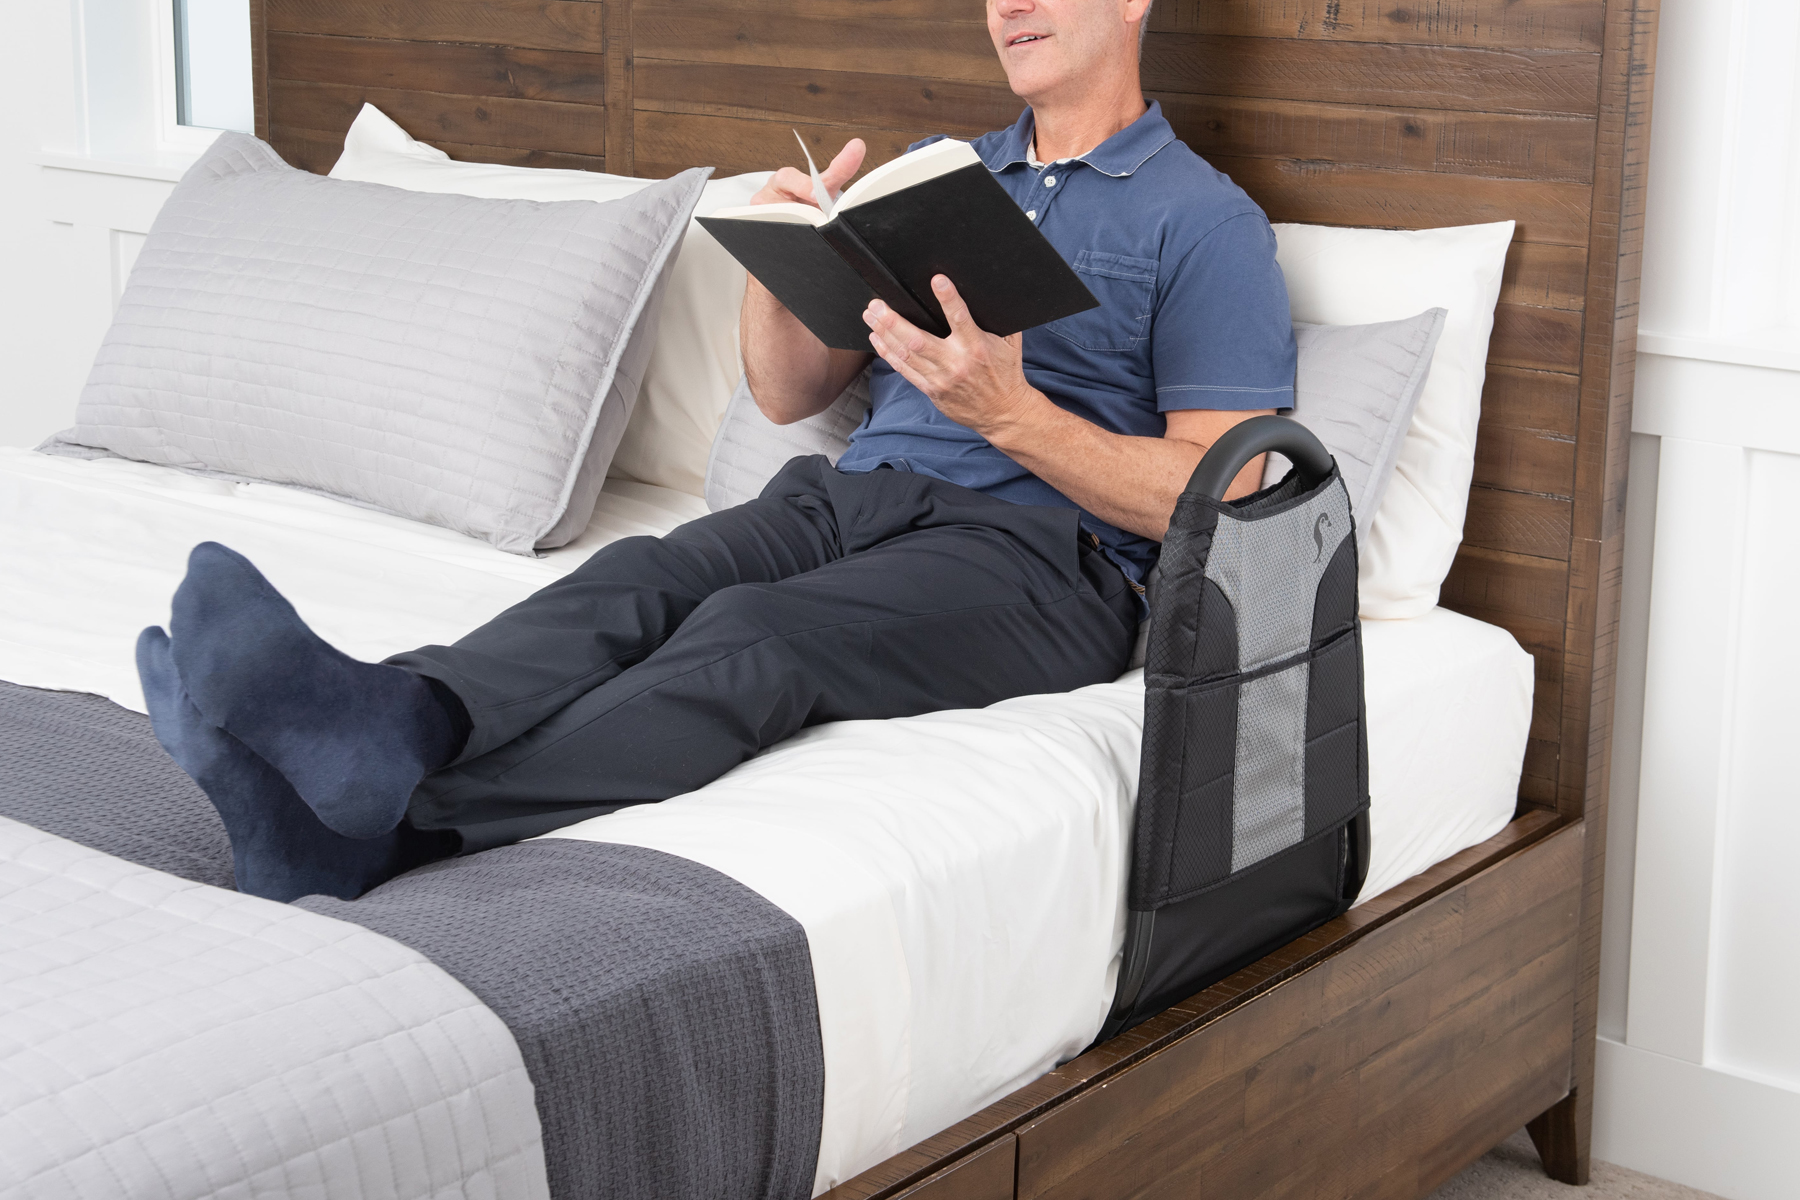 Stander 30-in Black Bed Rail - Prevent Falls, Assist with Transfers,  Collapsible Design